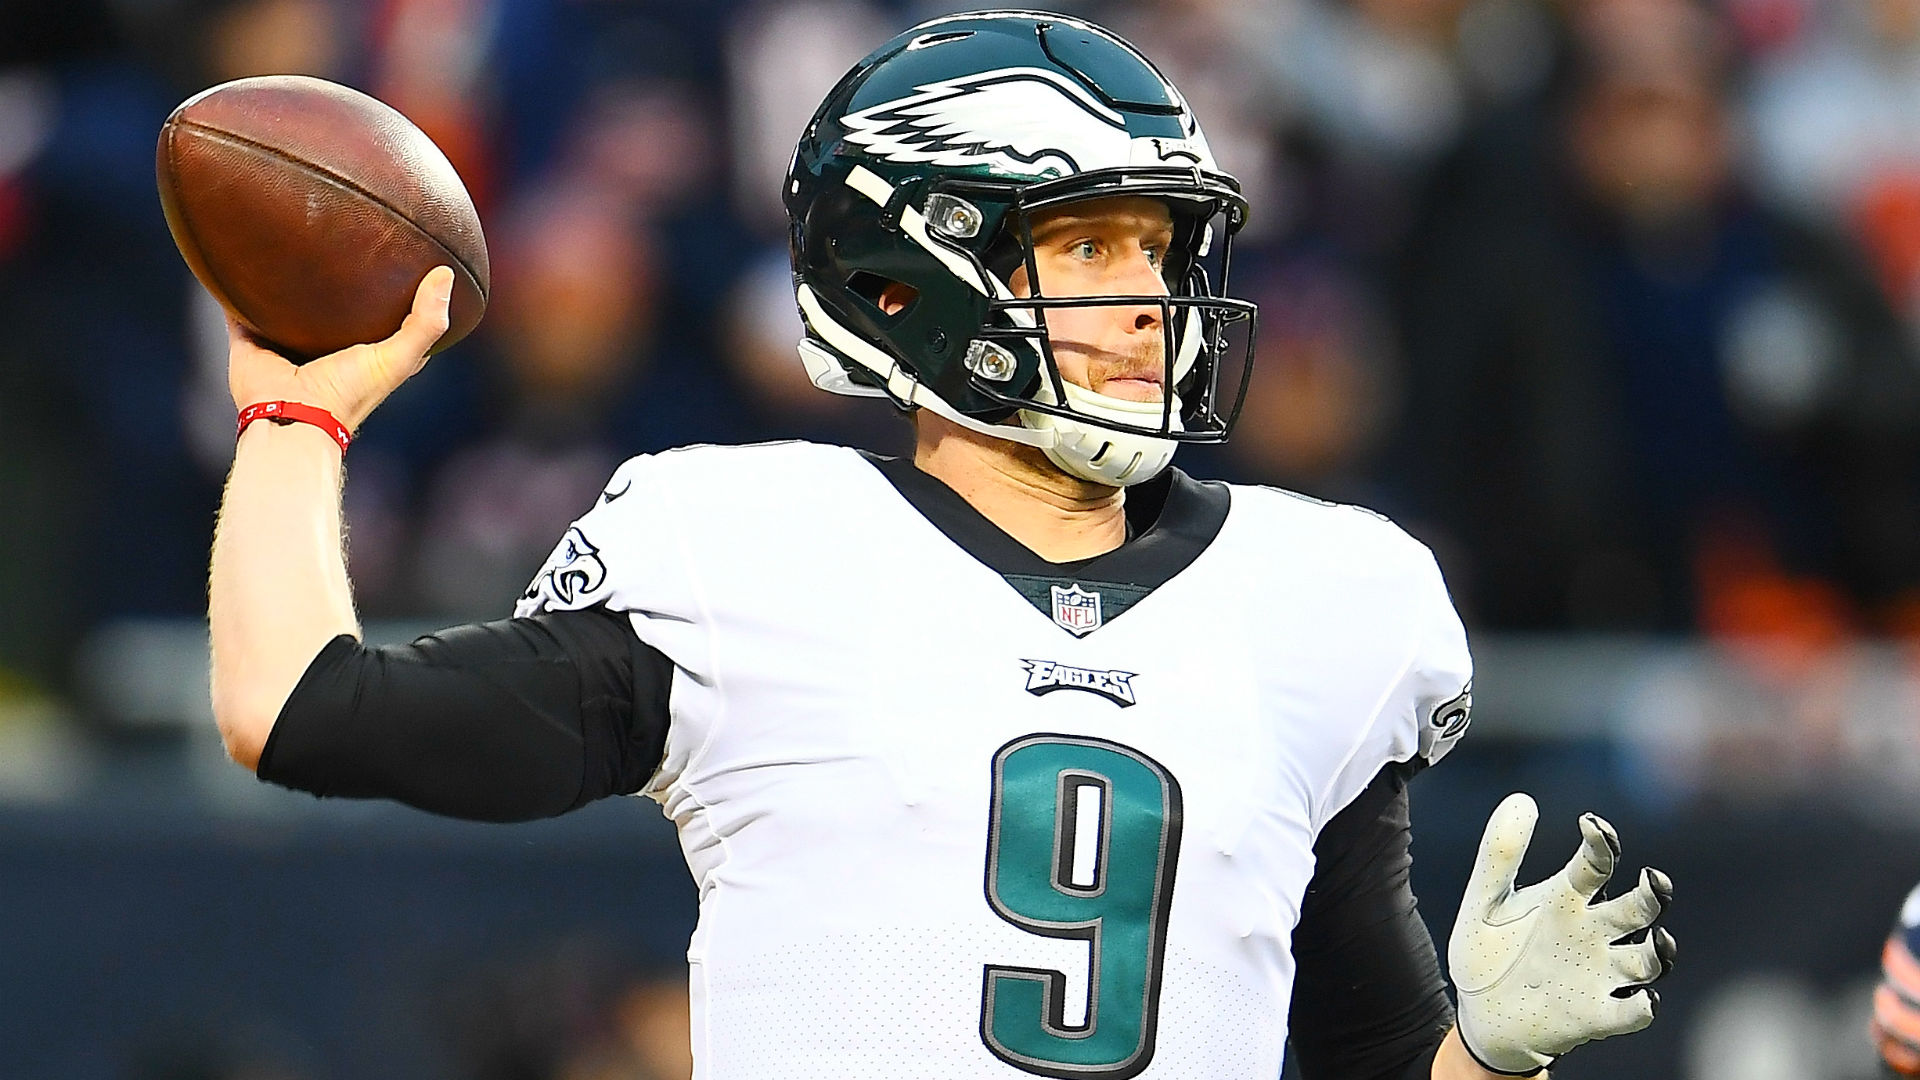 Nick Foles' future with Eagles will be forecasted Sunday in New Orleans